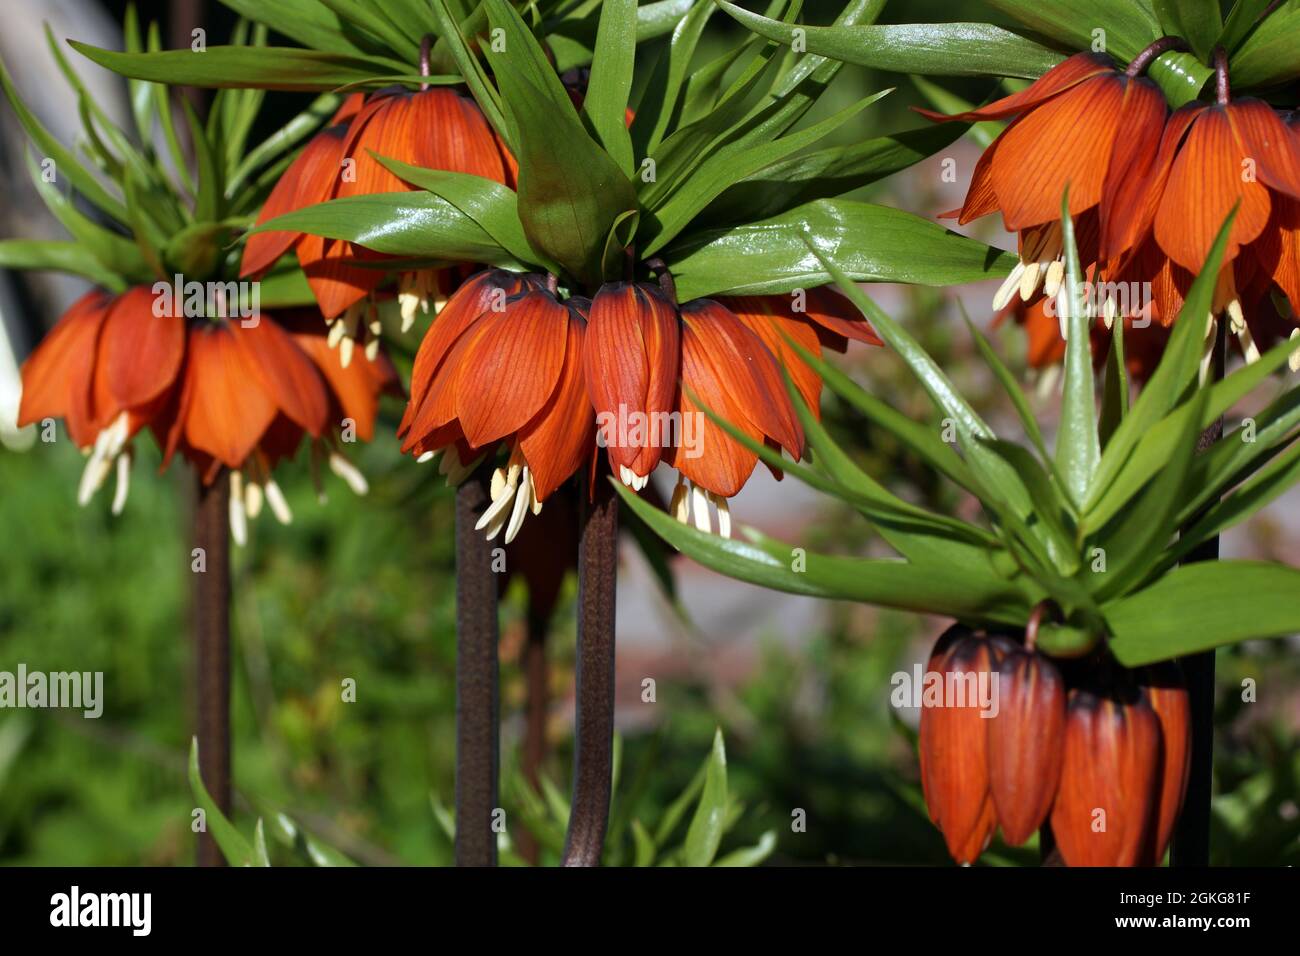 Fritillaria imperialis (crown imperial, imperial fritillary or Kaiser's crown) is a species of flowering plant in the lily family. Stock Photo